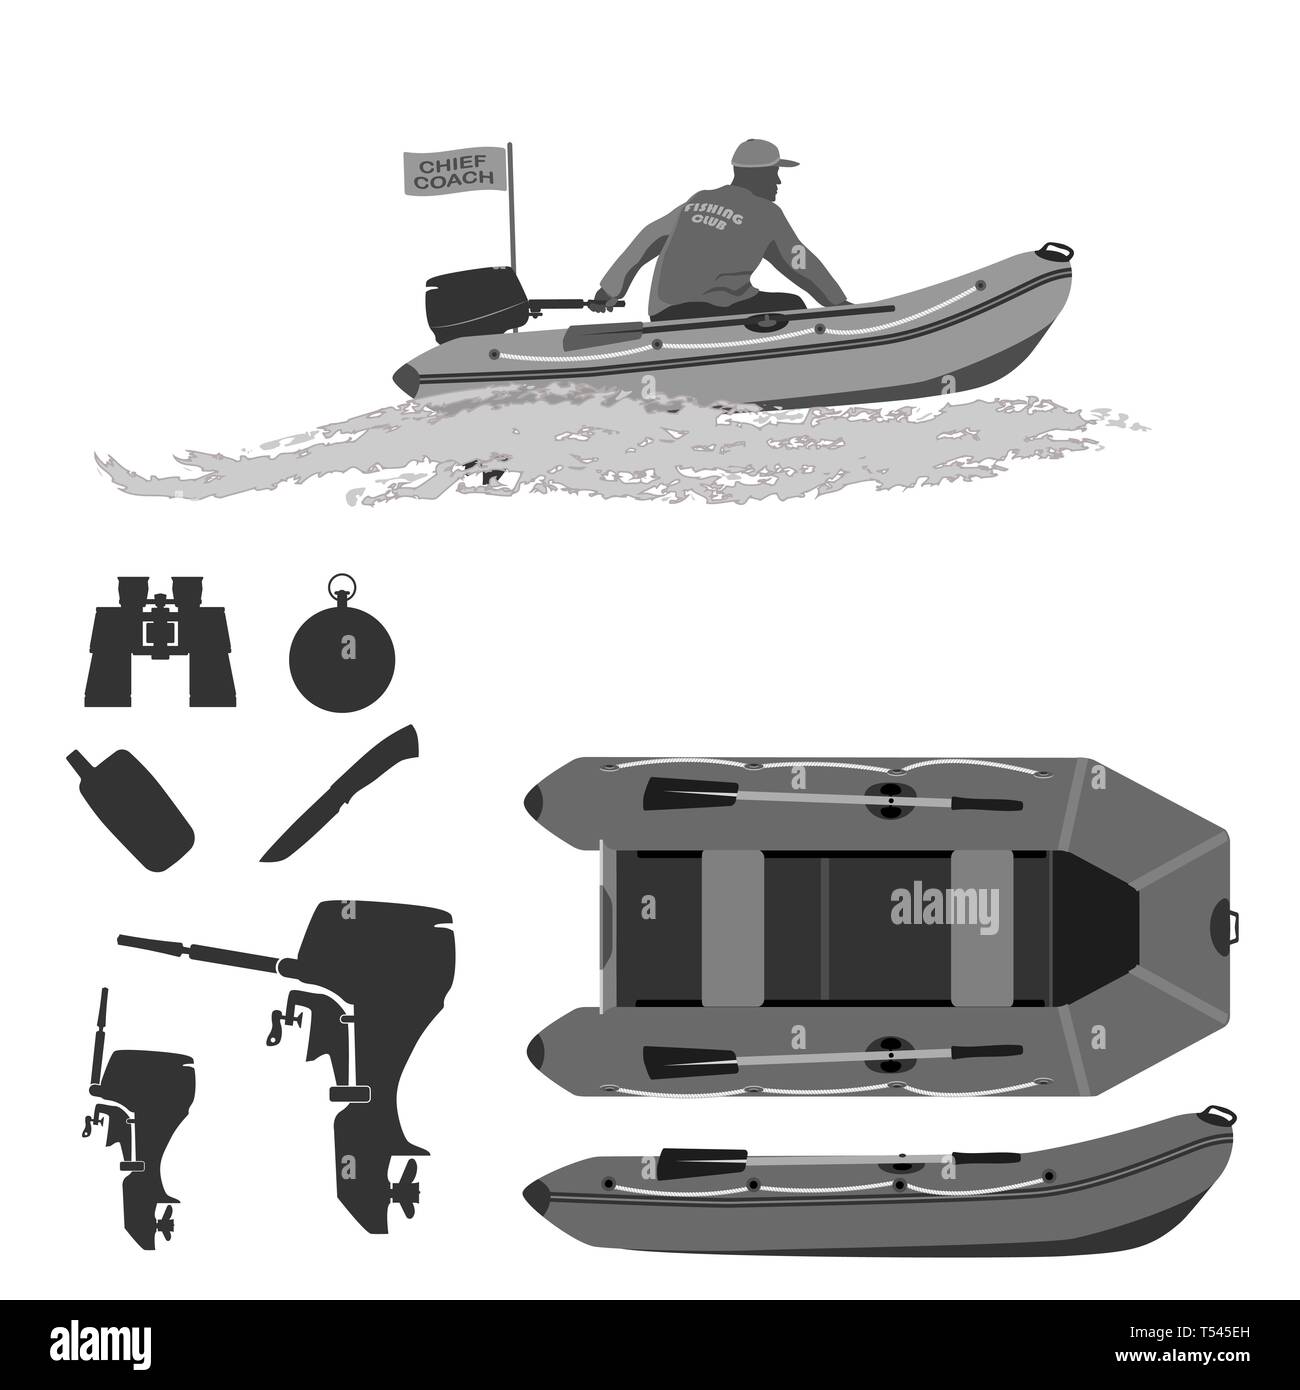 755 Small Fishing Boat Outboard Motor Images, Stock Photos, 3D objects, &  Vectors